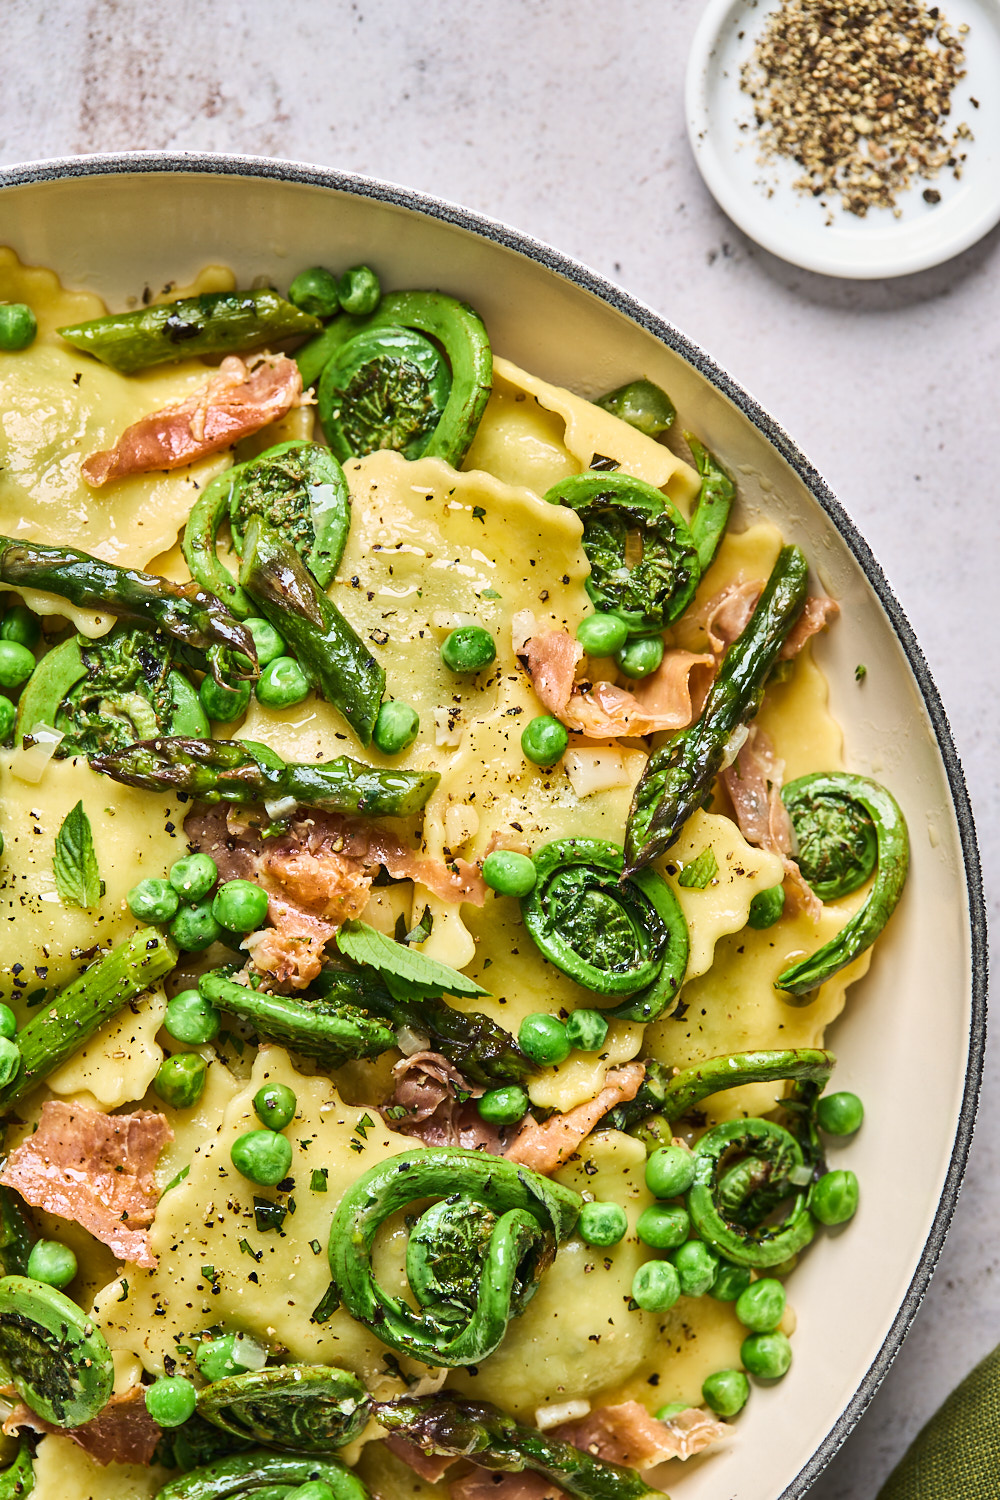 Lemon Butter Ravioli With Roasted Asparagus and Peas